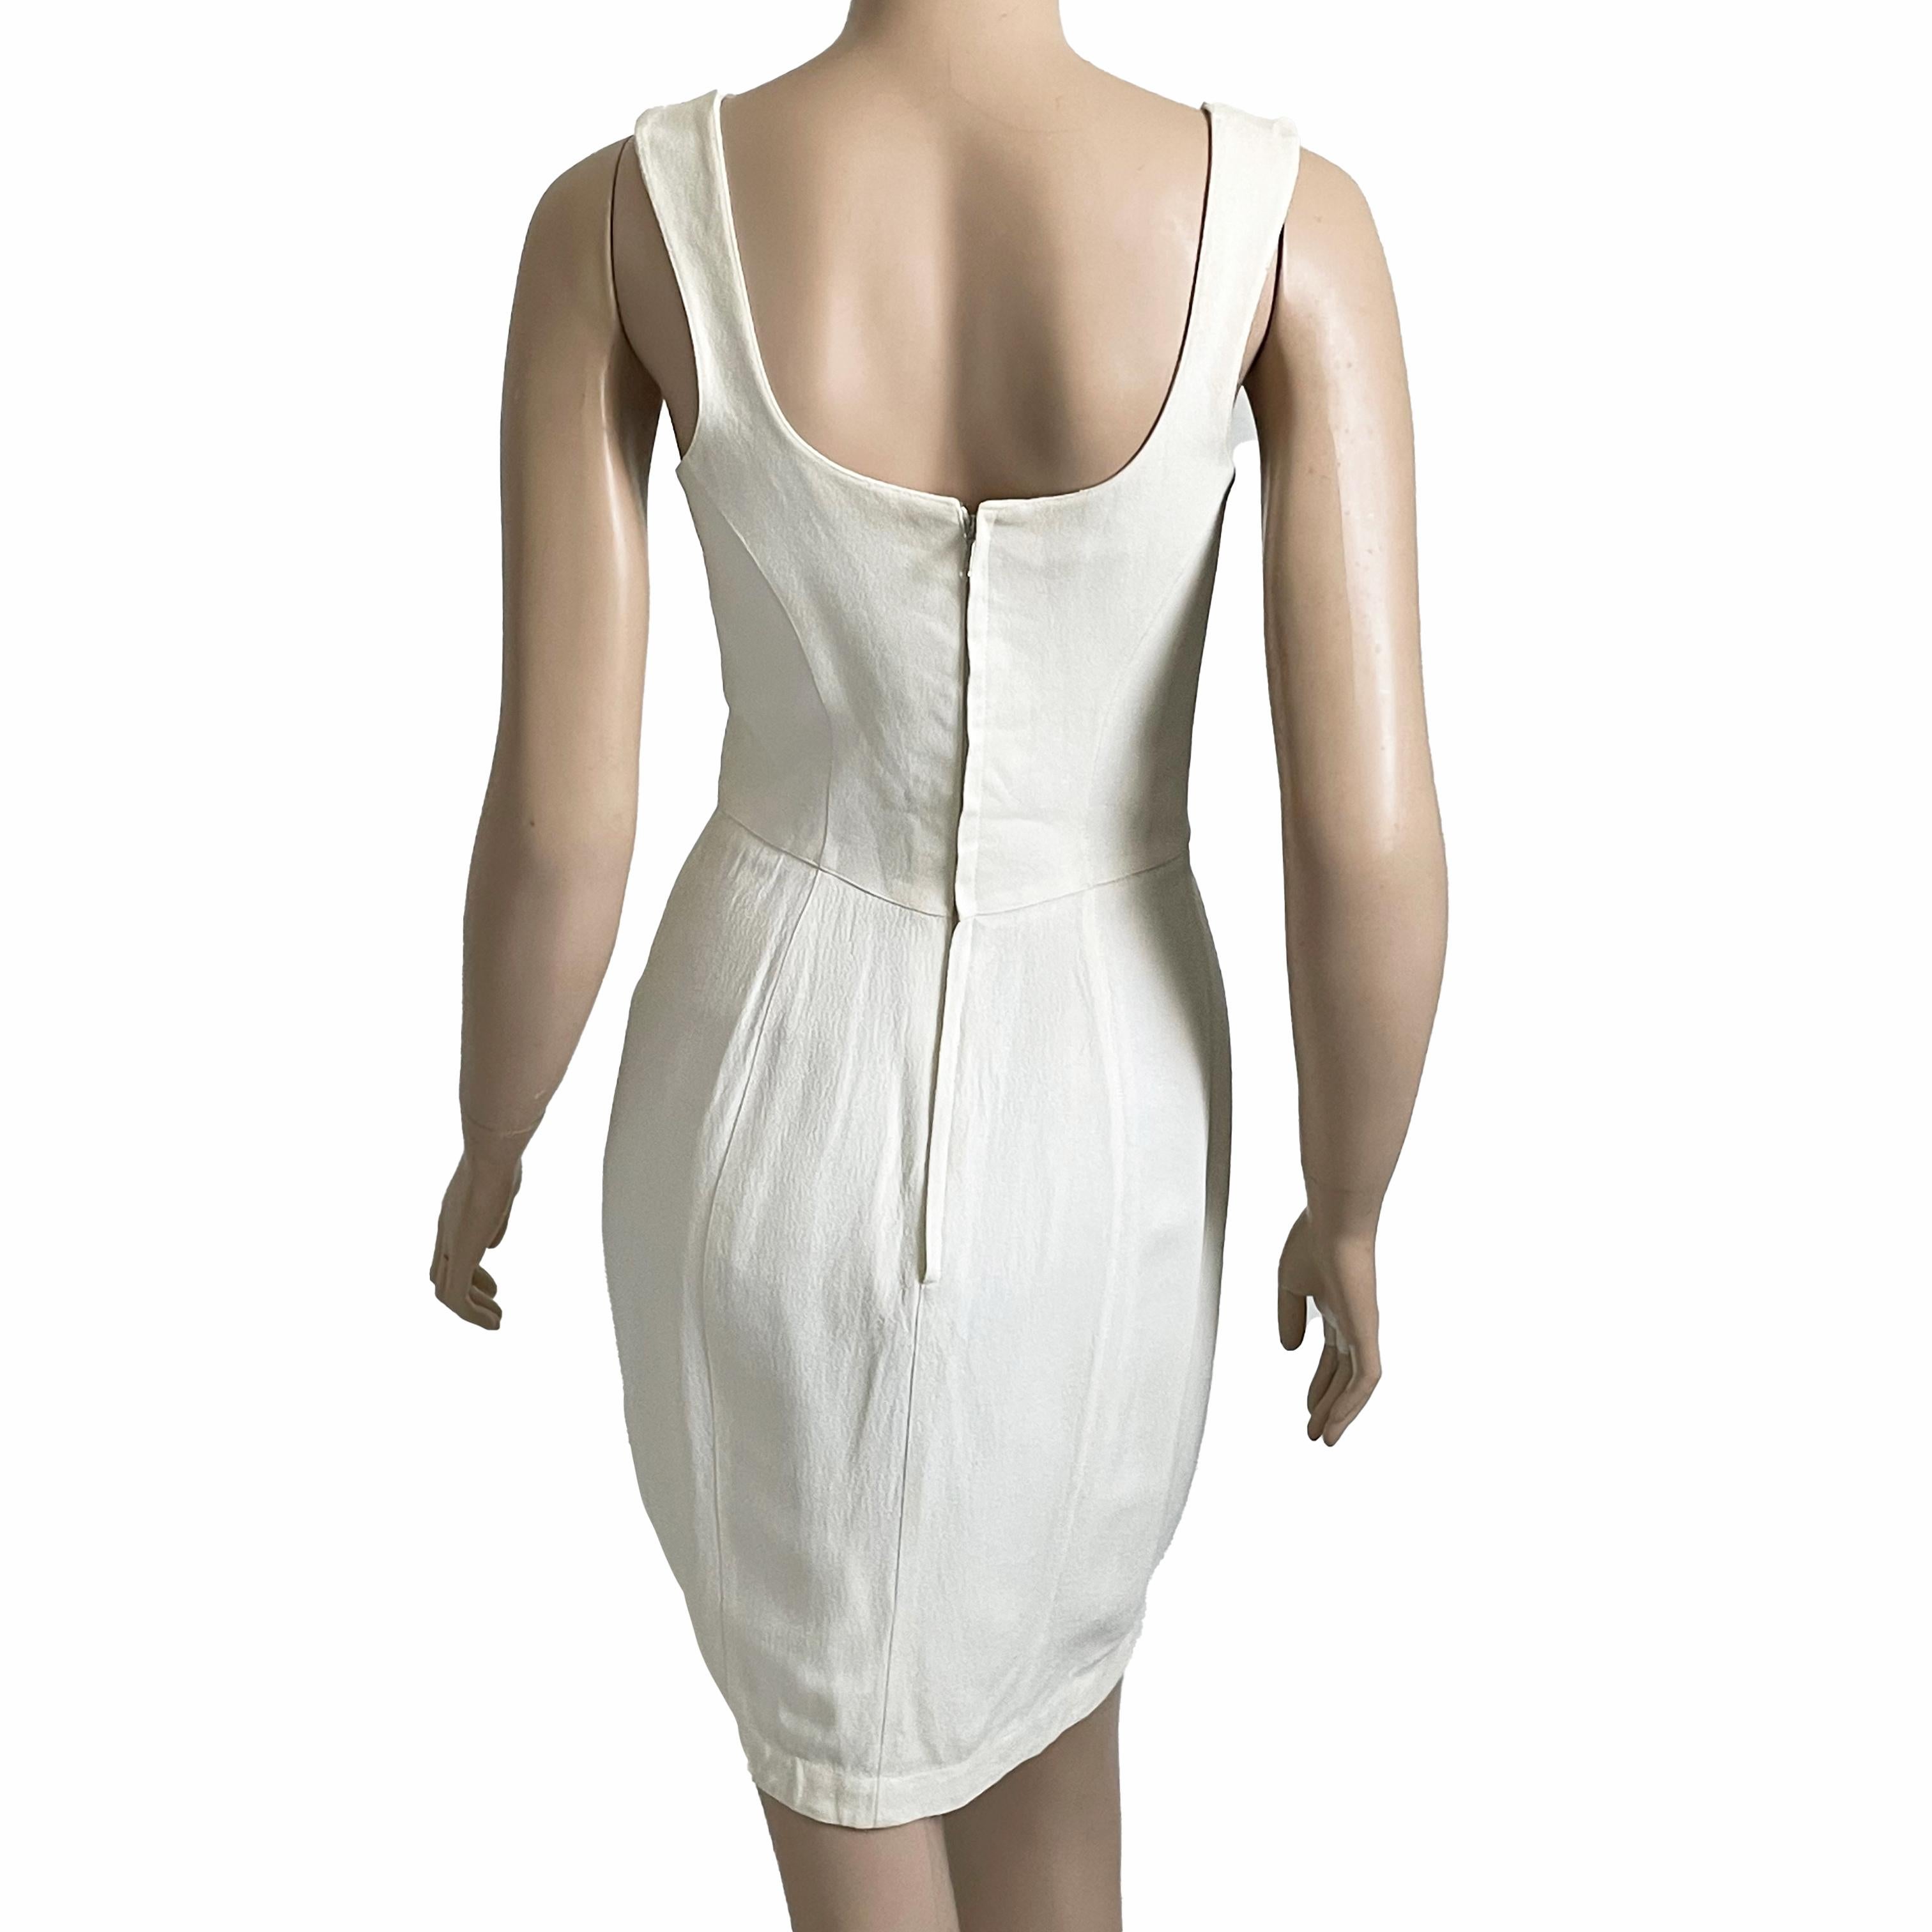 Thierry Mugler Cocktail Dress White Crepe Sculptural Chic Vintage 90s Sz 40 HTF For Sale 3